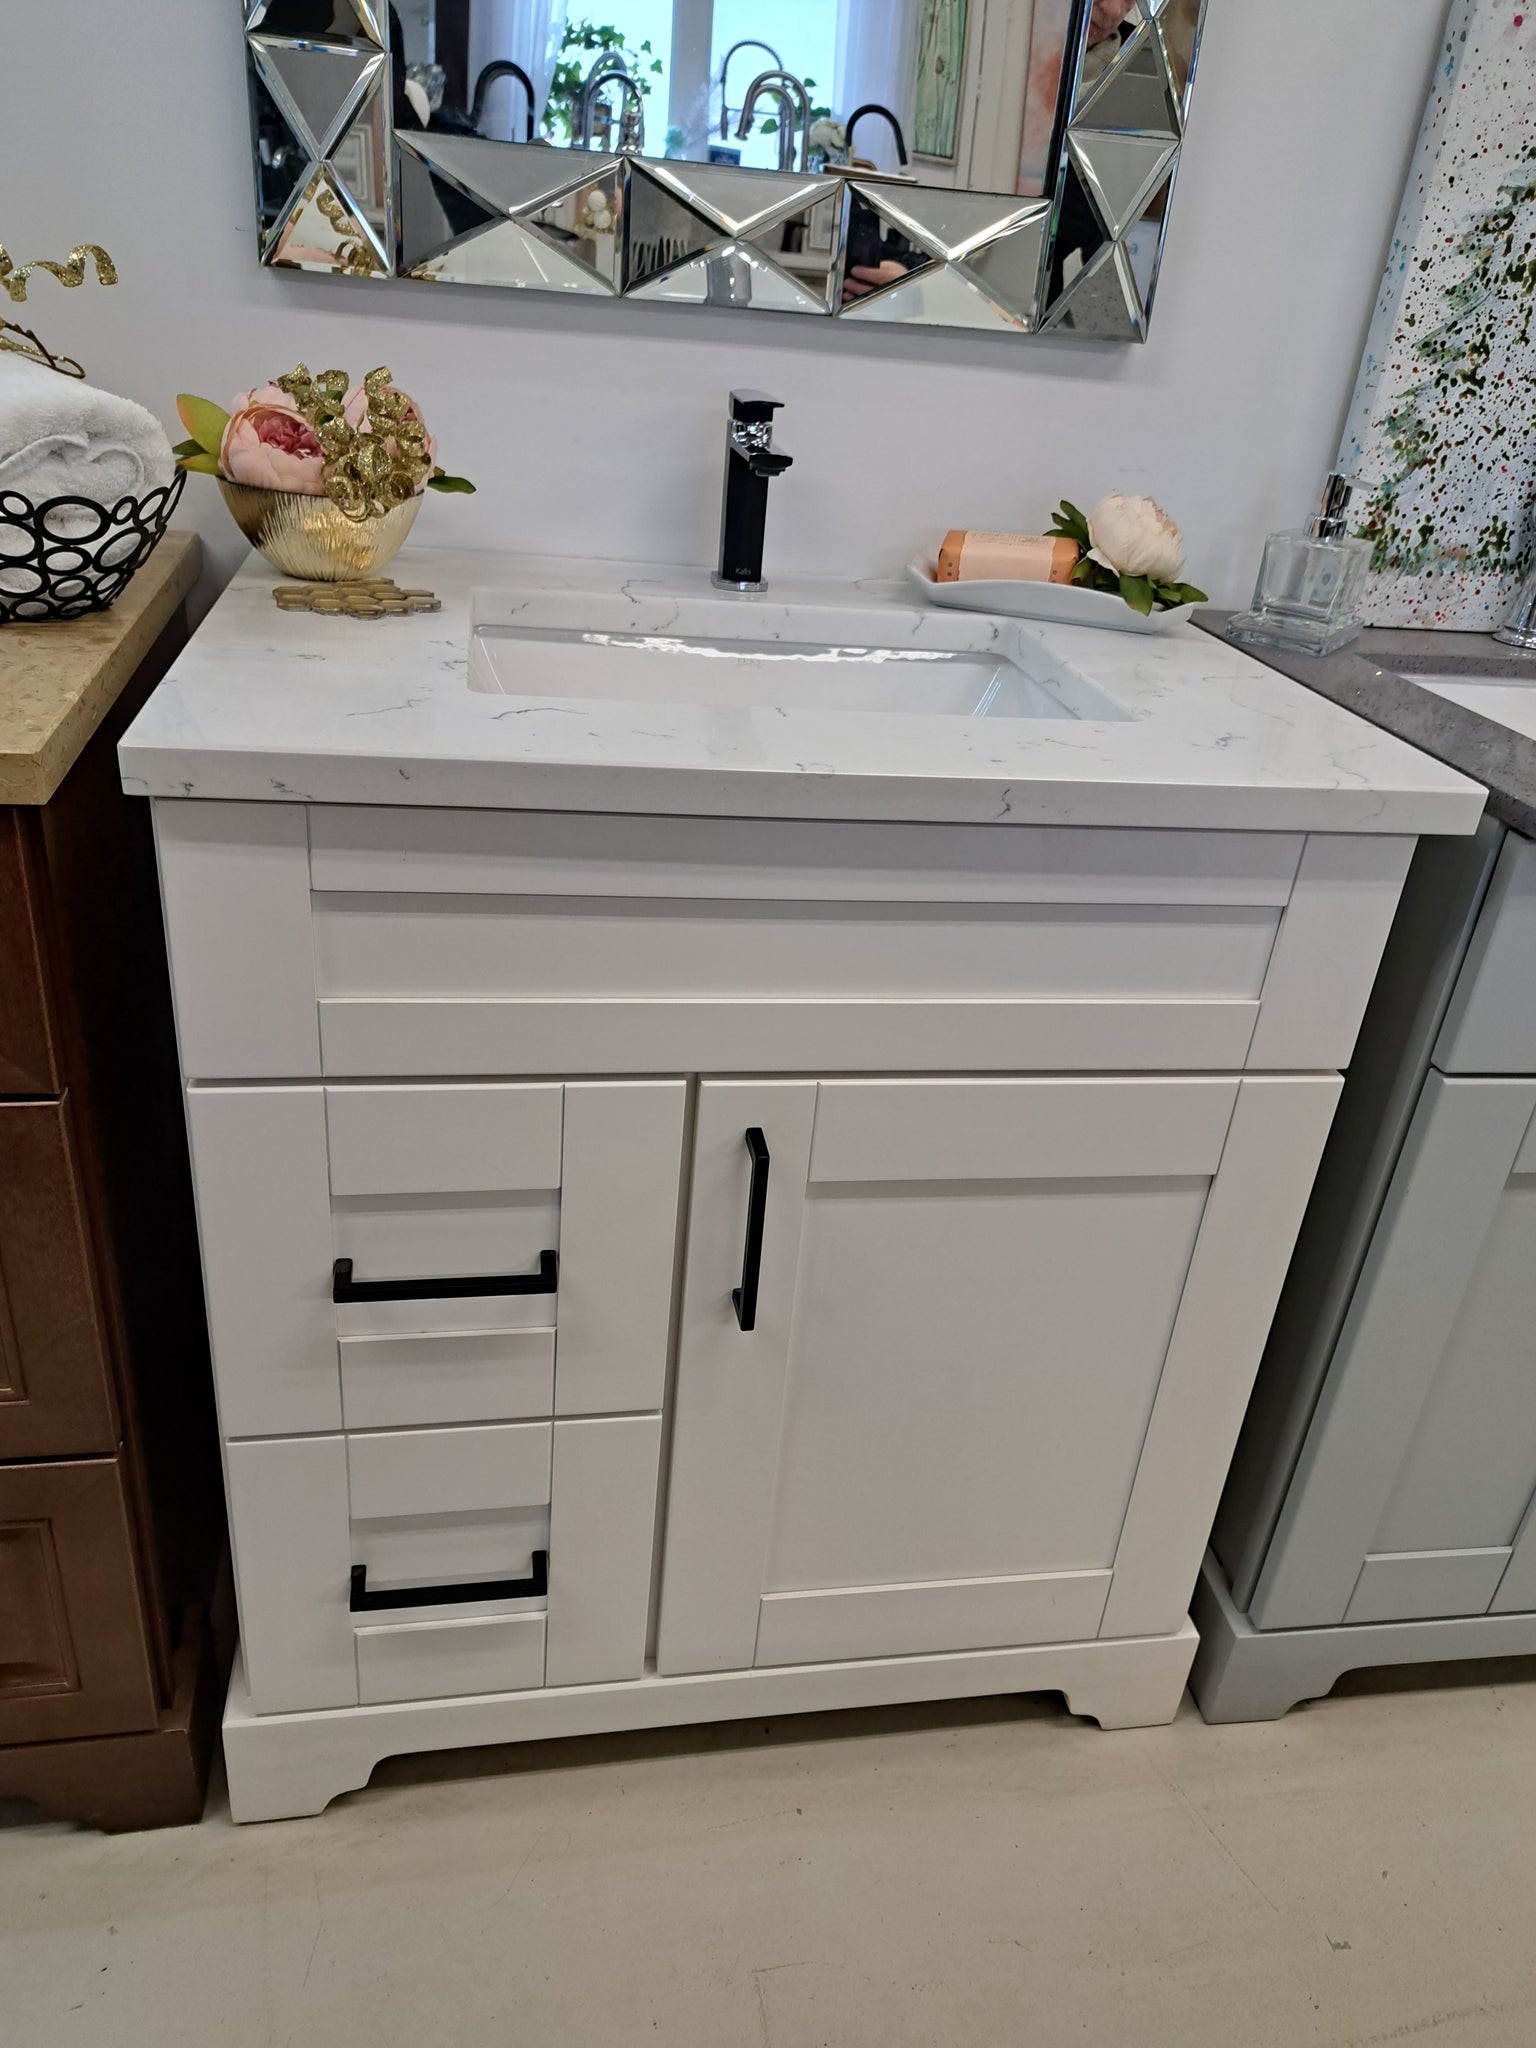 VANITY Solid Wood with Quartz Top and sink. Price $ 800